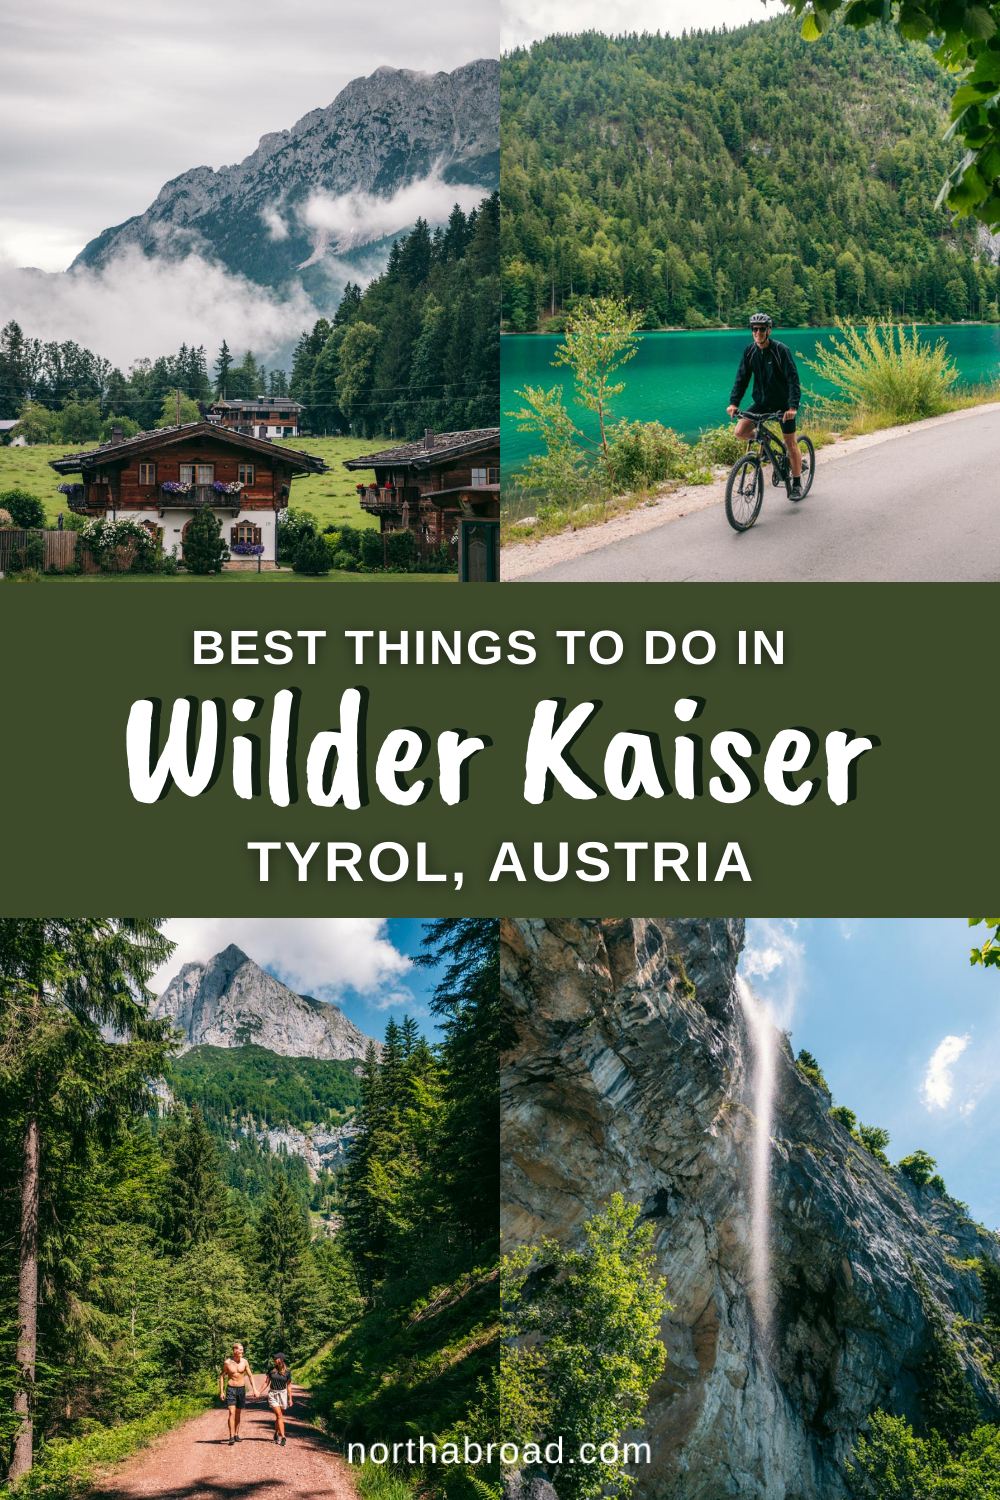 Everything you need to know about Wilder Kaiser in Tyrol, Austria including what to do, when to visit and where to stay